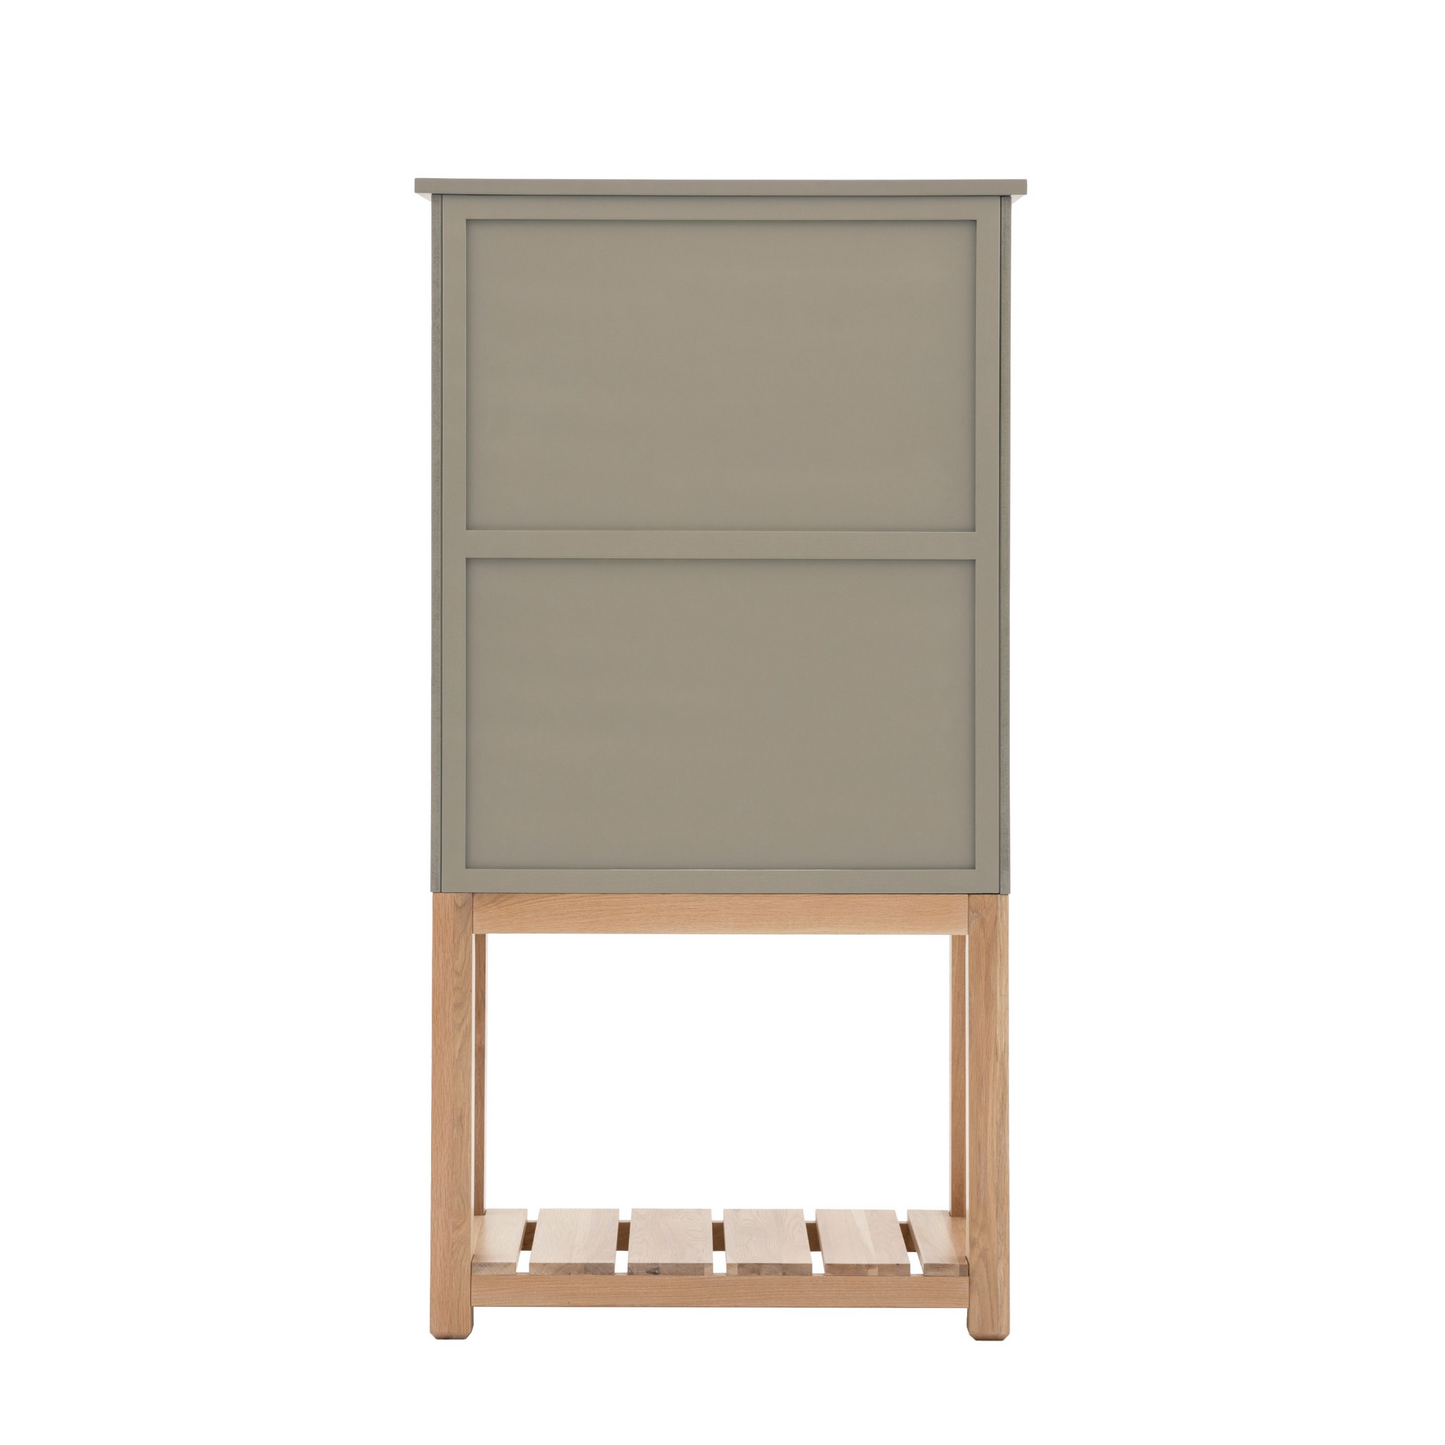 Load image into Gallery viewer, A Buckland 2 Door Storage Cupboard for interior decor at home with wooden legs.
